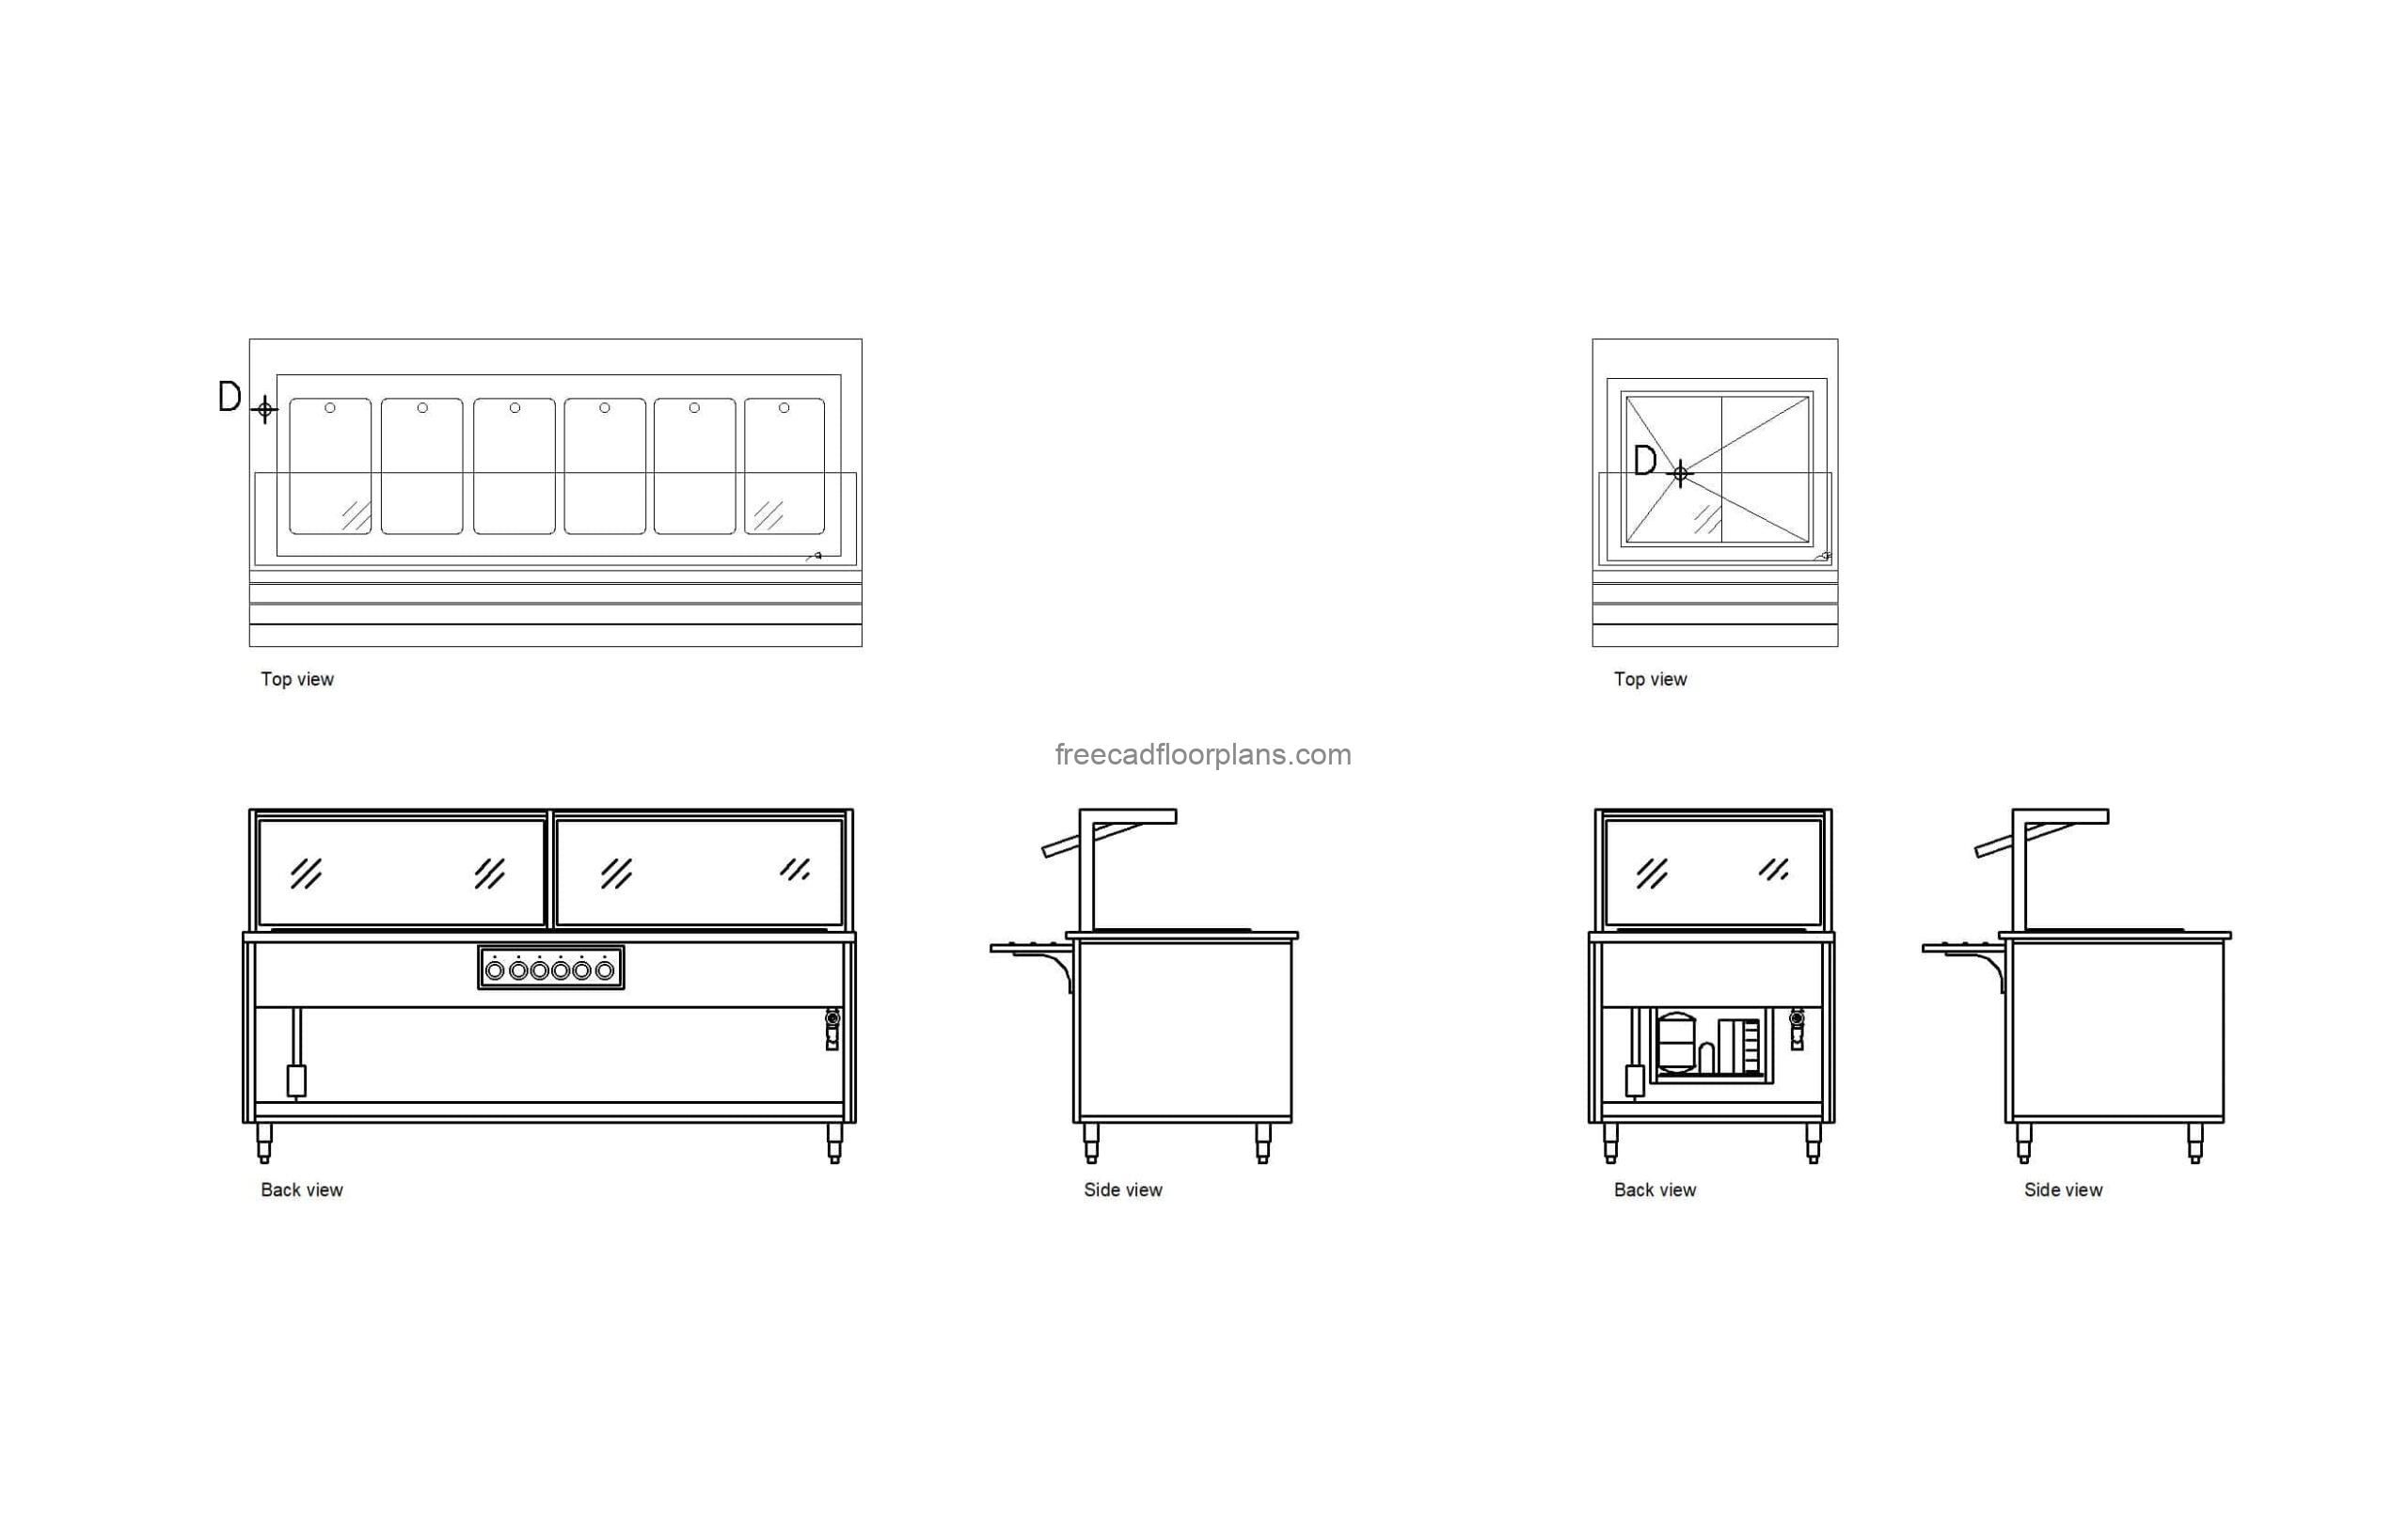 autocad drawing of hot and cold buffet tables, plan and elevation 2d views, dwg file free for download